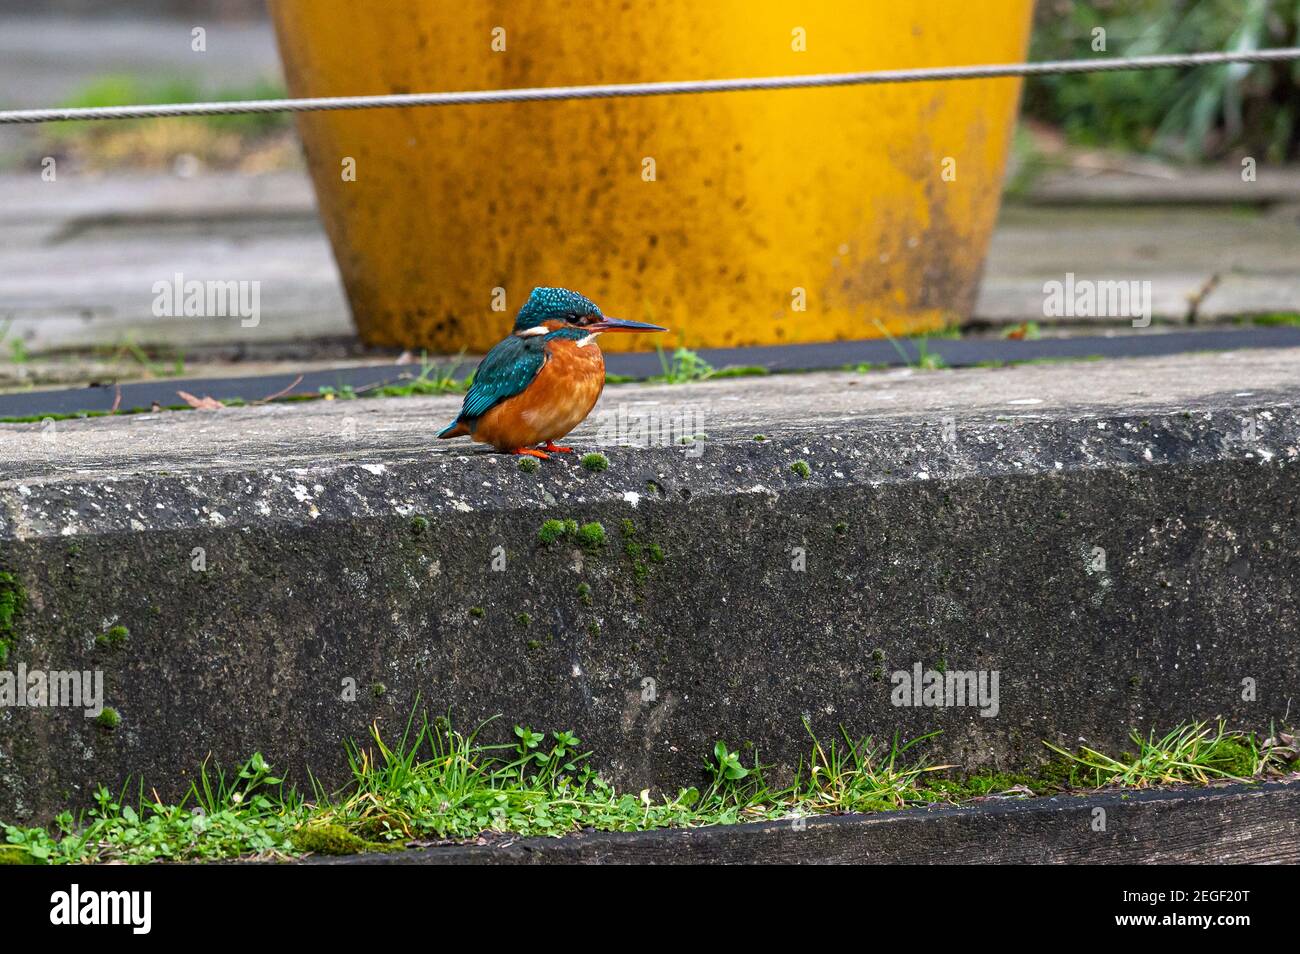 Female common kingfisher, alcedo atthis, urban town setting with reduced people activity due to pandemic, perched in front of restaurant plant pots Stock Photo